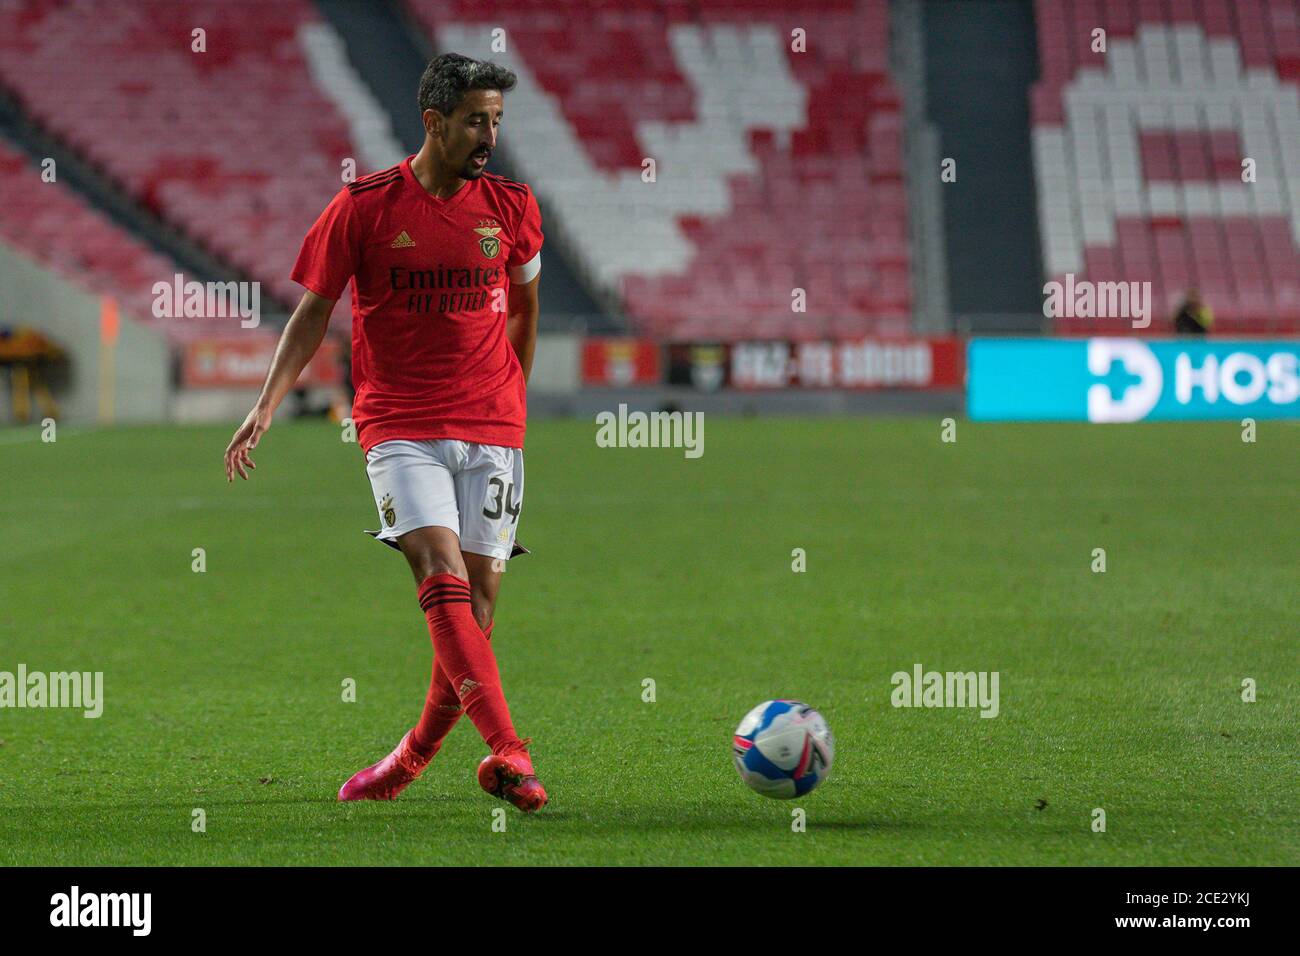 Lisbon, Portugal. August 30, 2020. Lisbon, Portugal. Benfica's defender from Portugal Andre Almeida (34) in action during the friendly game between SL Benfica vs AFC Bournemouth Credit: Alexandre de Sousa/Alamy Live News Stock Photo